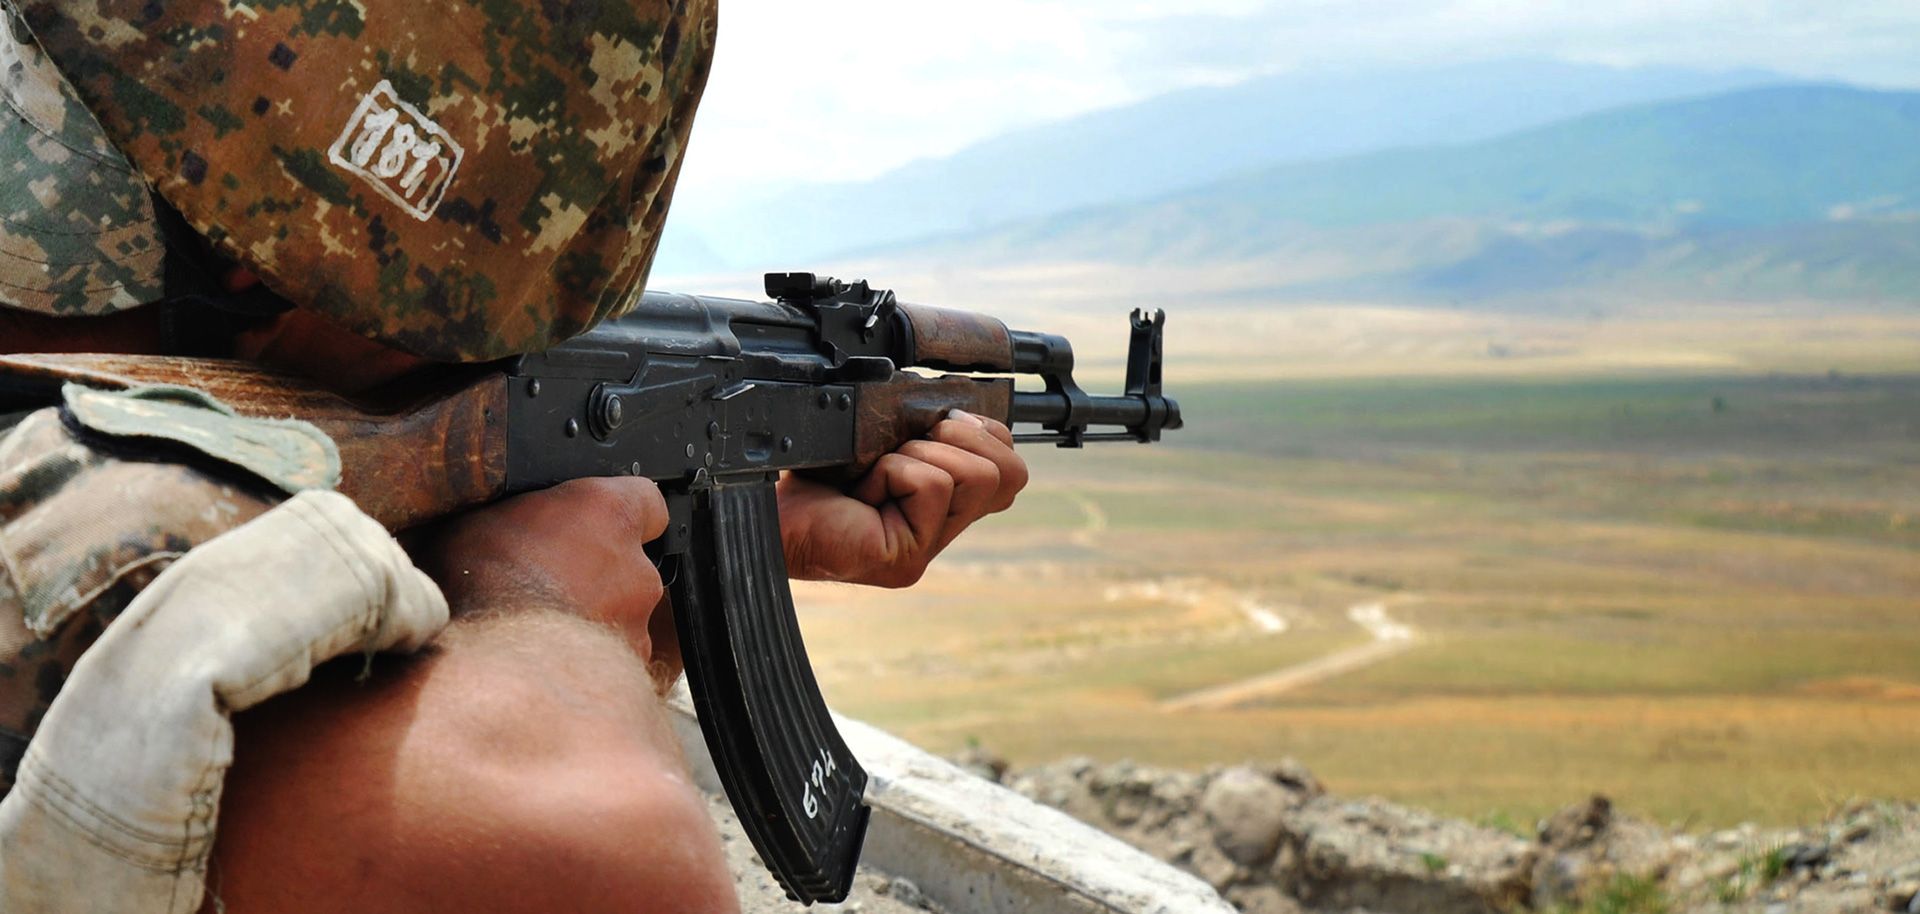 An Armenian soldier of the self-proclaimed republic of Nagorno-Karabakh aims his rifle as he stands in a trench at the frontline on the border with Azerbaijan near the town of Martakert, on July 6, 2012.